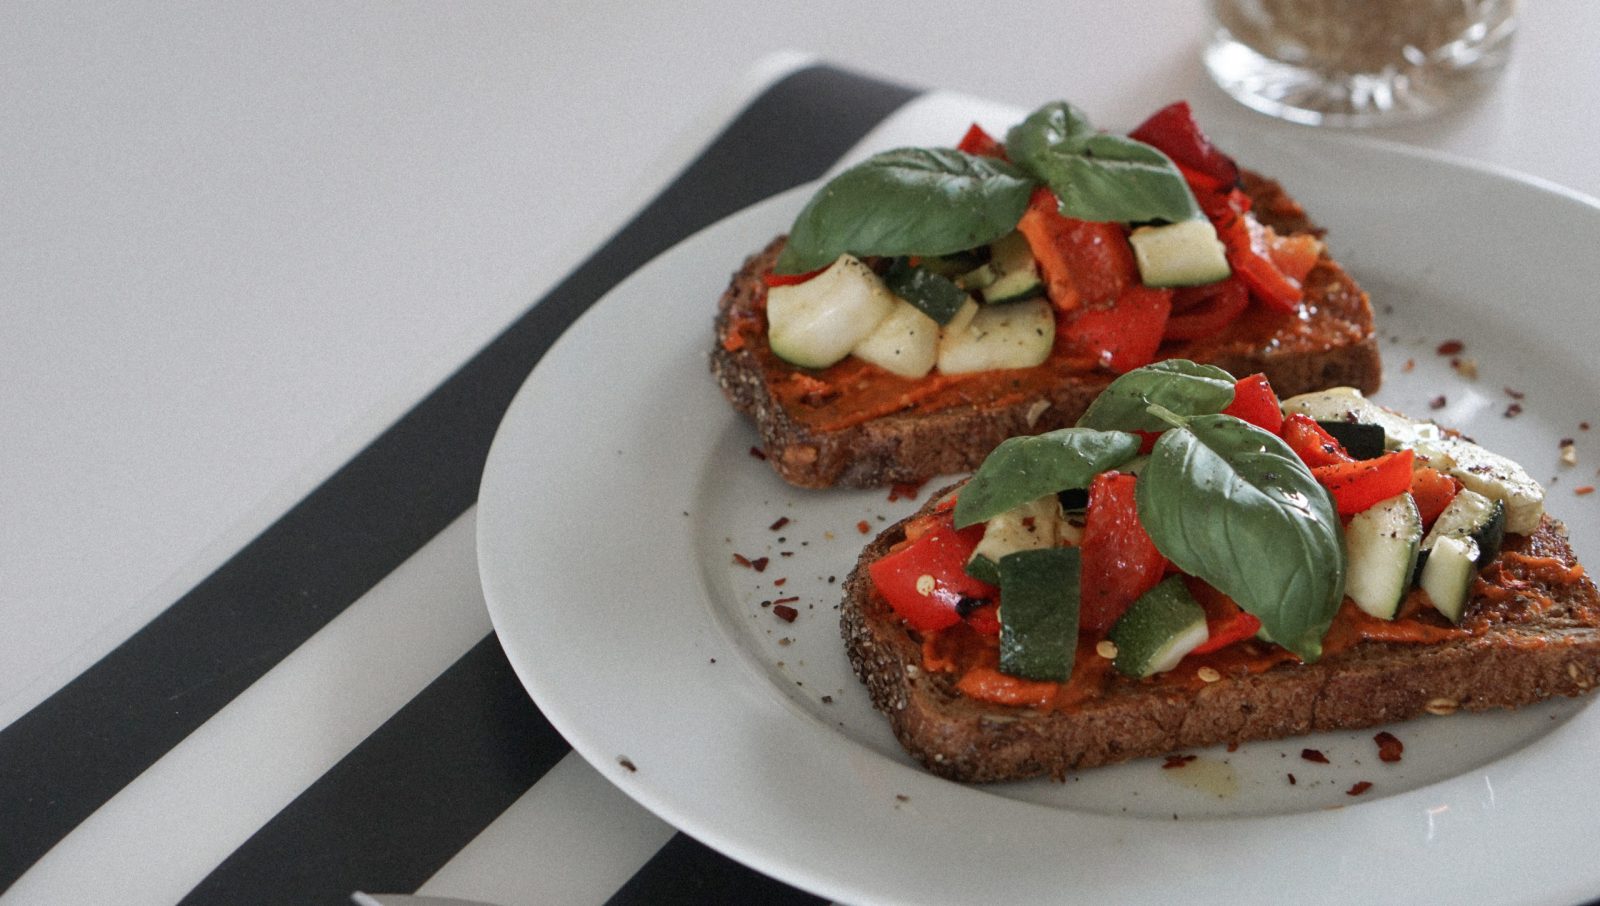 Current go-to lunch: toasted bread with grilled veggies.